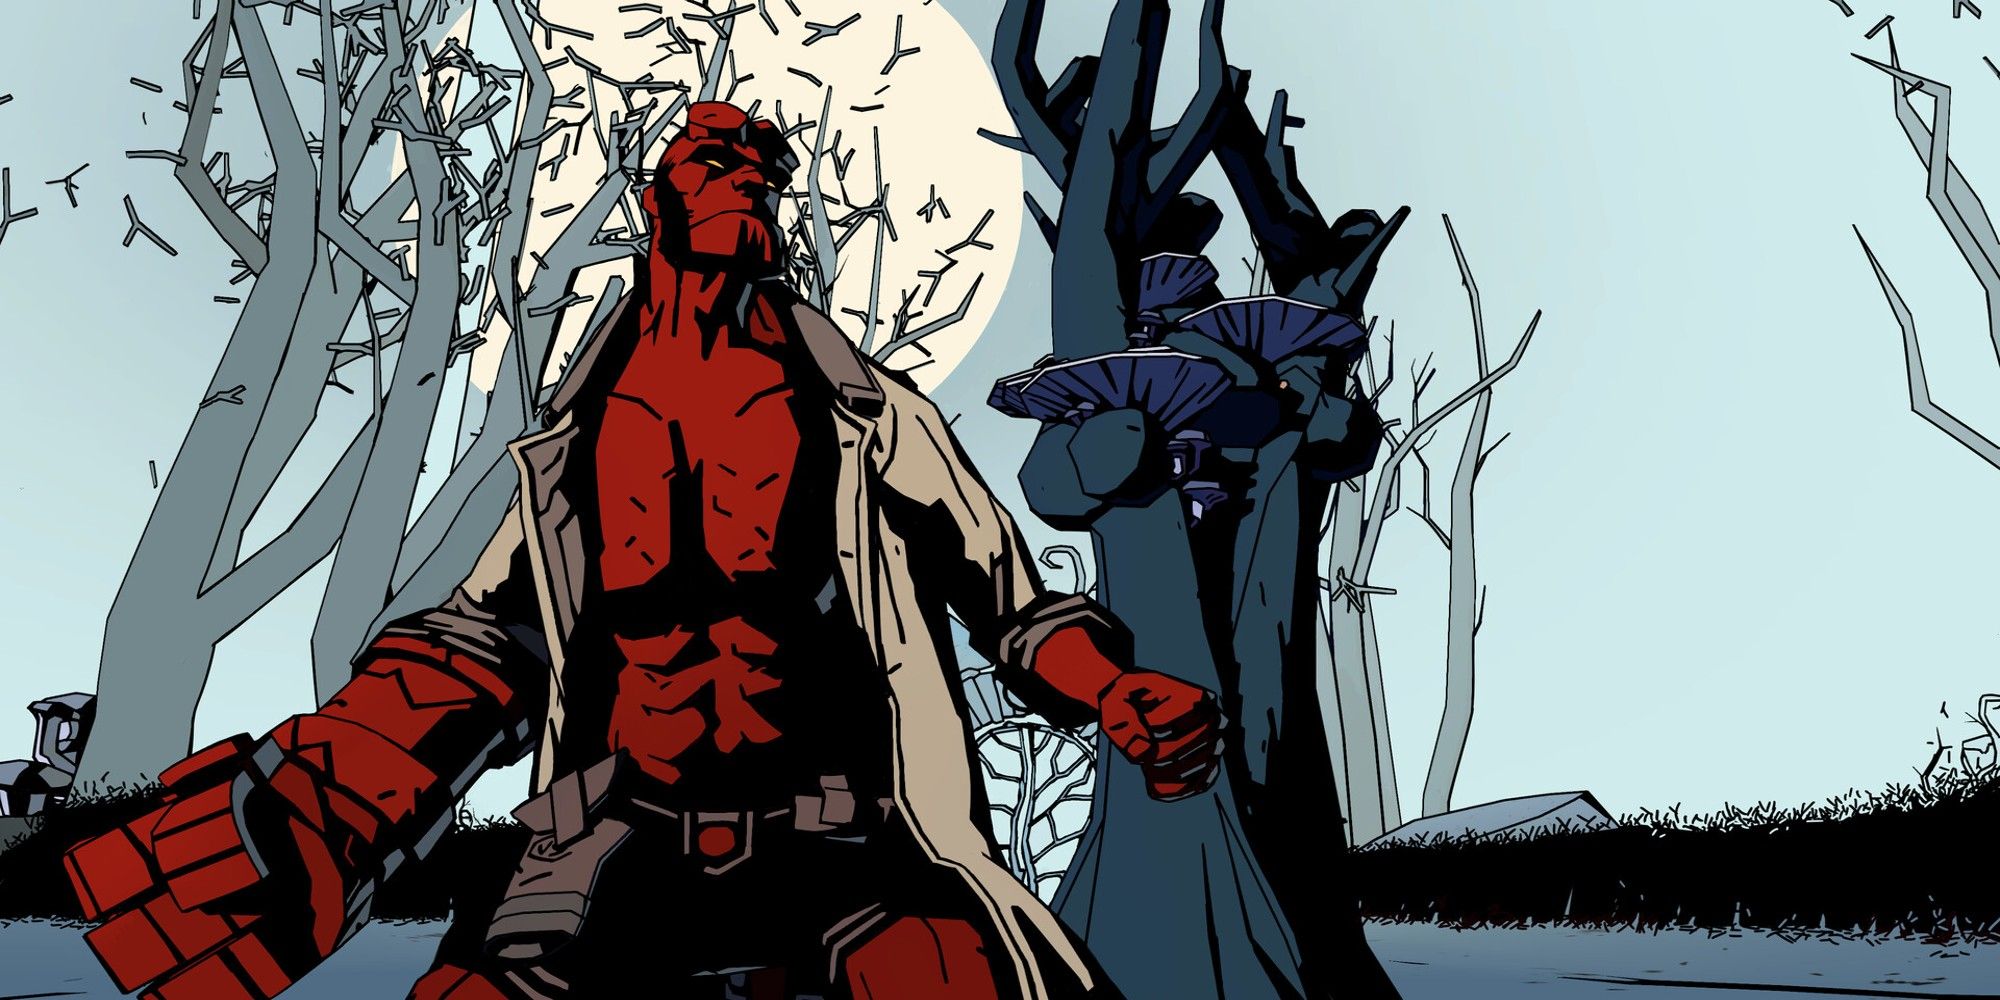 Hellboy faces the Web of the Wyrd in Dark Horse Comics